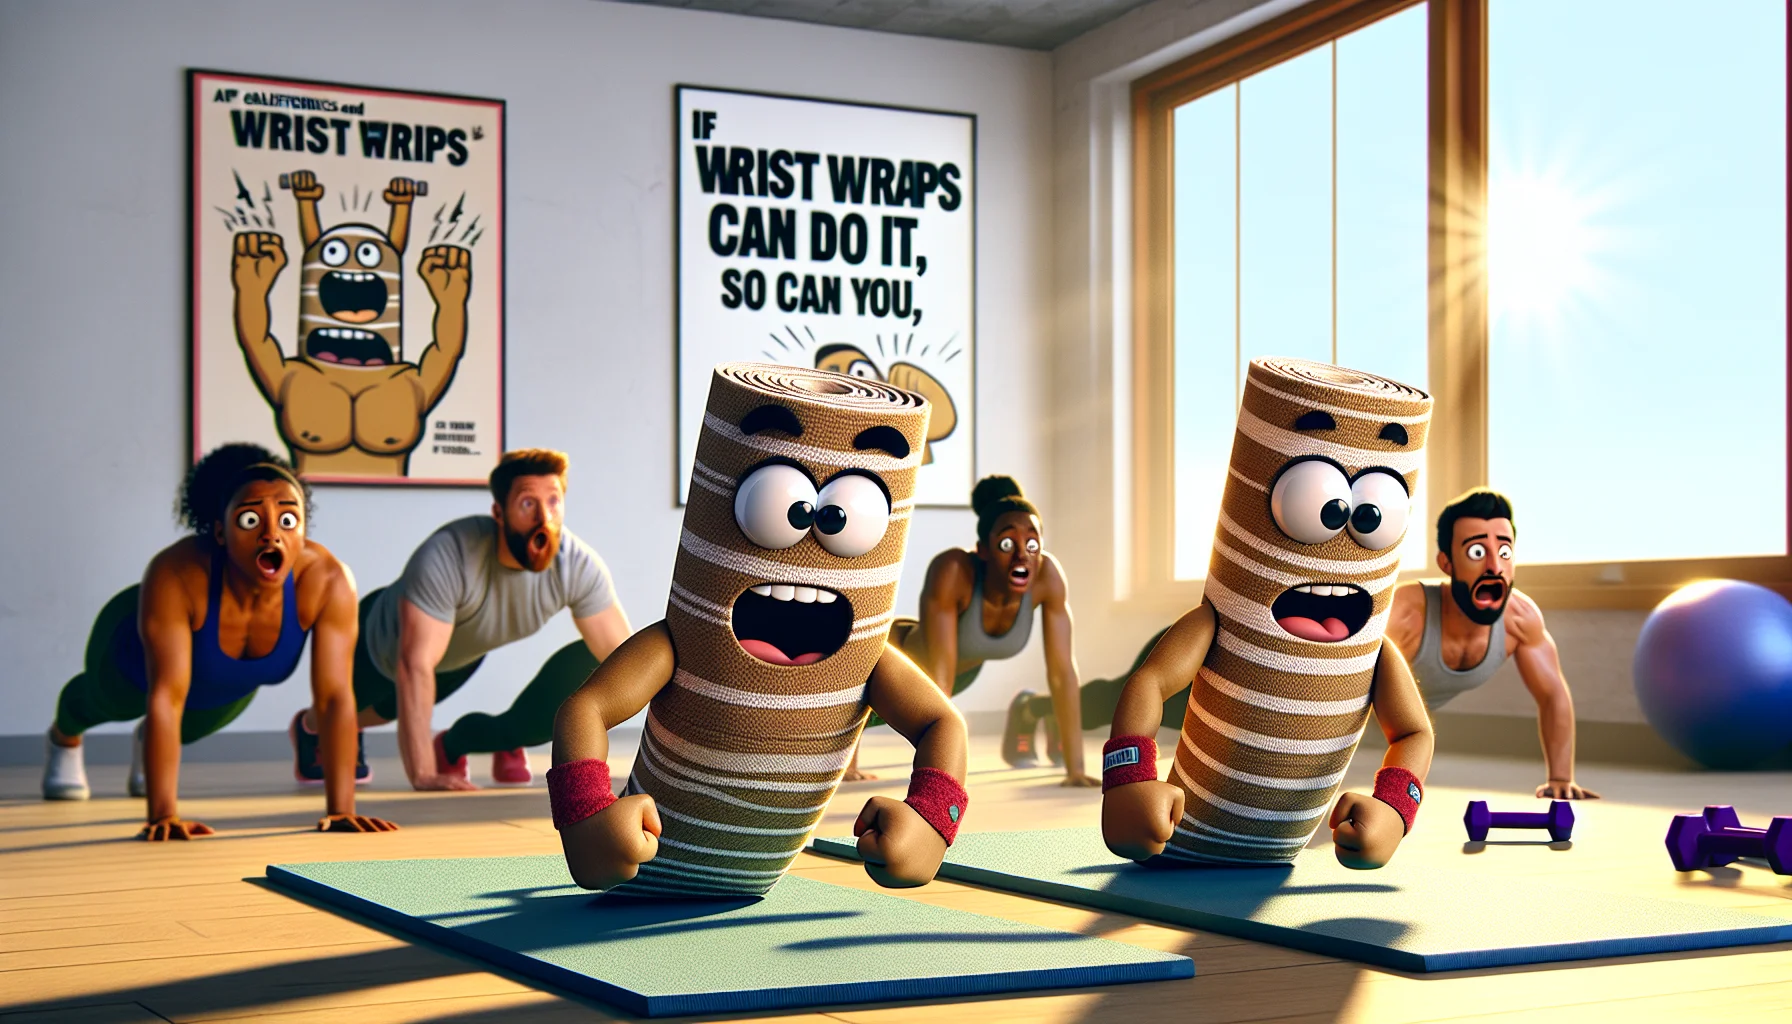 Create a realistic and humorous image illustrating a pair of calisthenics wrist wraps who have come to life. These animated wrist wraps are enthusiastically performing push-ups, trying to motivate people to exercise. Their determined faces express intense energy and motivation. They are on a yoga mat in a sunlit, tidy room with fitness posters on the wall. One poster humorously states, 'If wrist wraps can do it, so can you!'. Meanwhile, a few startled human exercisers of mixed genders and diverse descents are watching this amusing spectacle with surprised expressions.